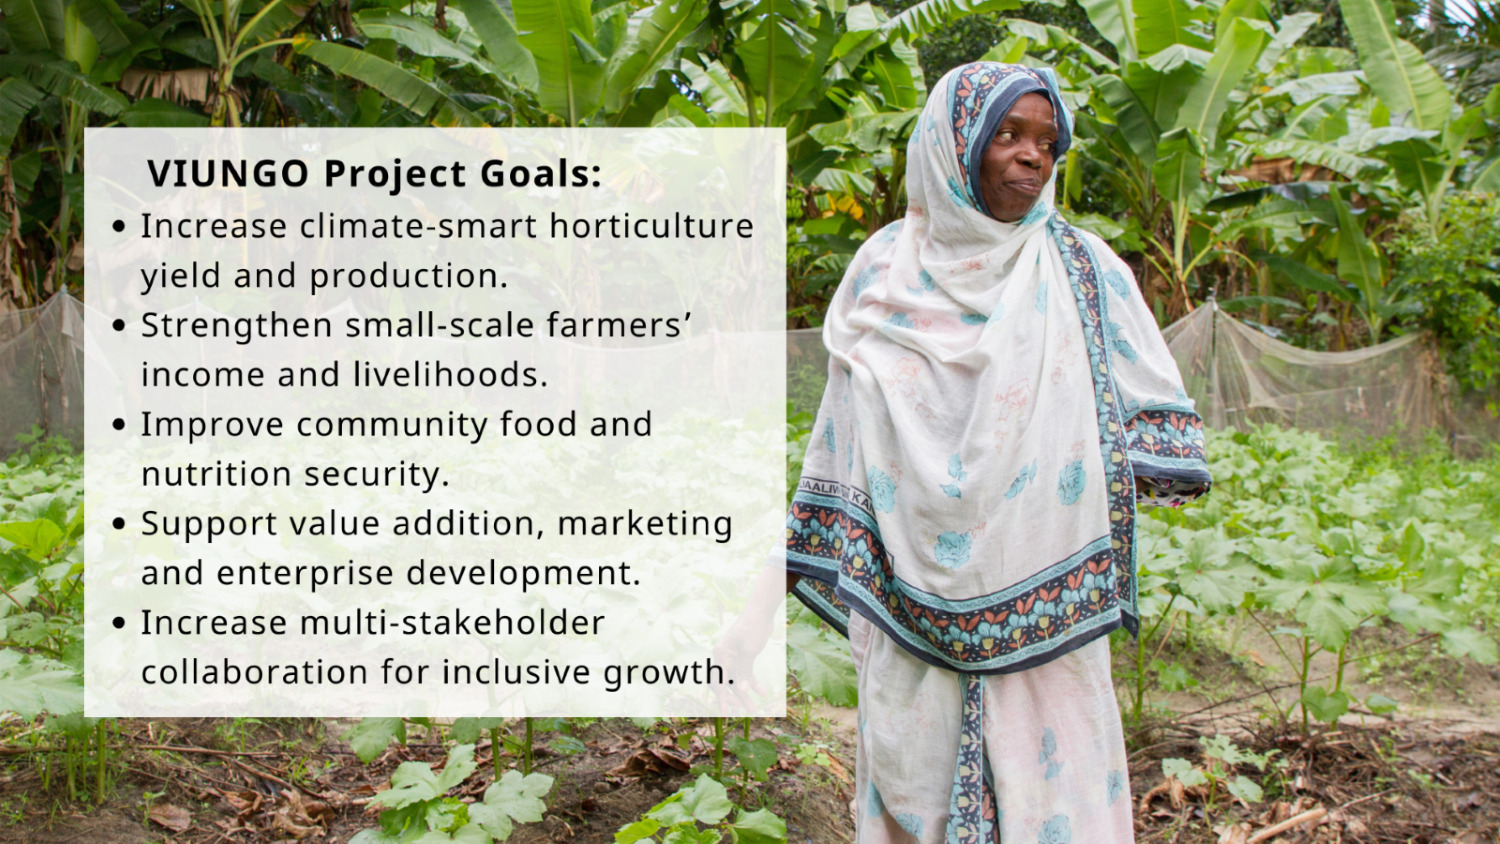 The VIUNGO Project Goals - Increase climate-smart horticulture yield and production. - Strengthen small-scale farmers’ income and livelihoods. - Improve community food and nutrition security. - Support value addition, marketing, and enterprise development. - Increase multi-stakeholder collaboration for inclusive growth.The VIUNGO Project Goals - Increase climate-smart horticulture yield and production. - Strengthen small-scale farmers’ income and livelihoods. - Improve community food and nutrition security. - Support value addition, marketing, and enterprise development. - Increase multi-stakeholder collaboration for inclusive growth.